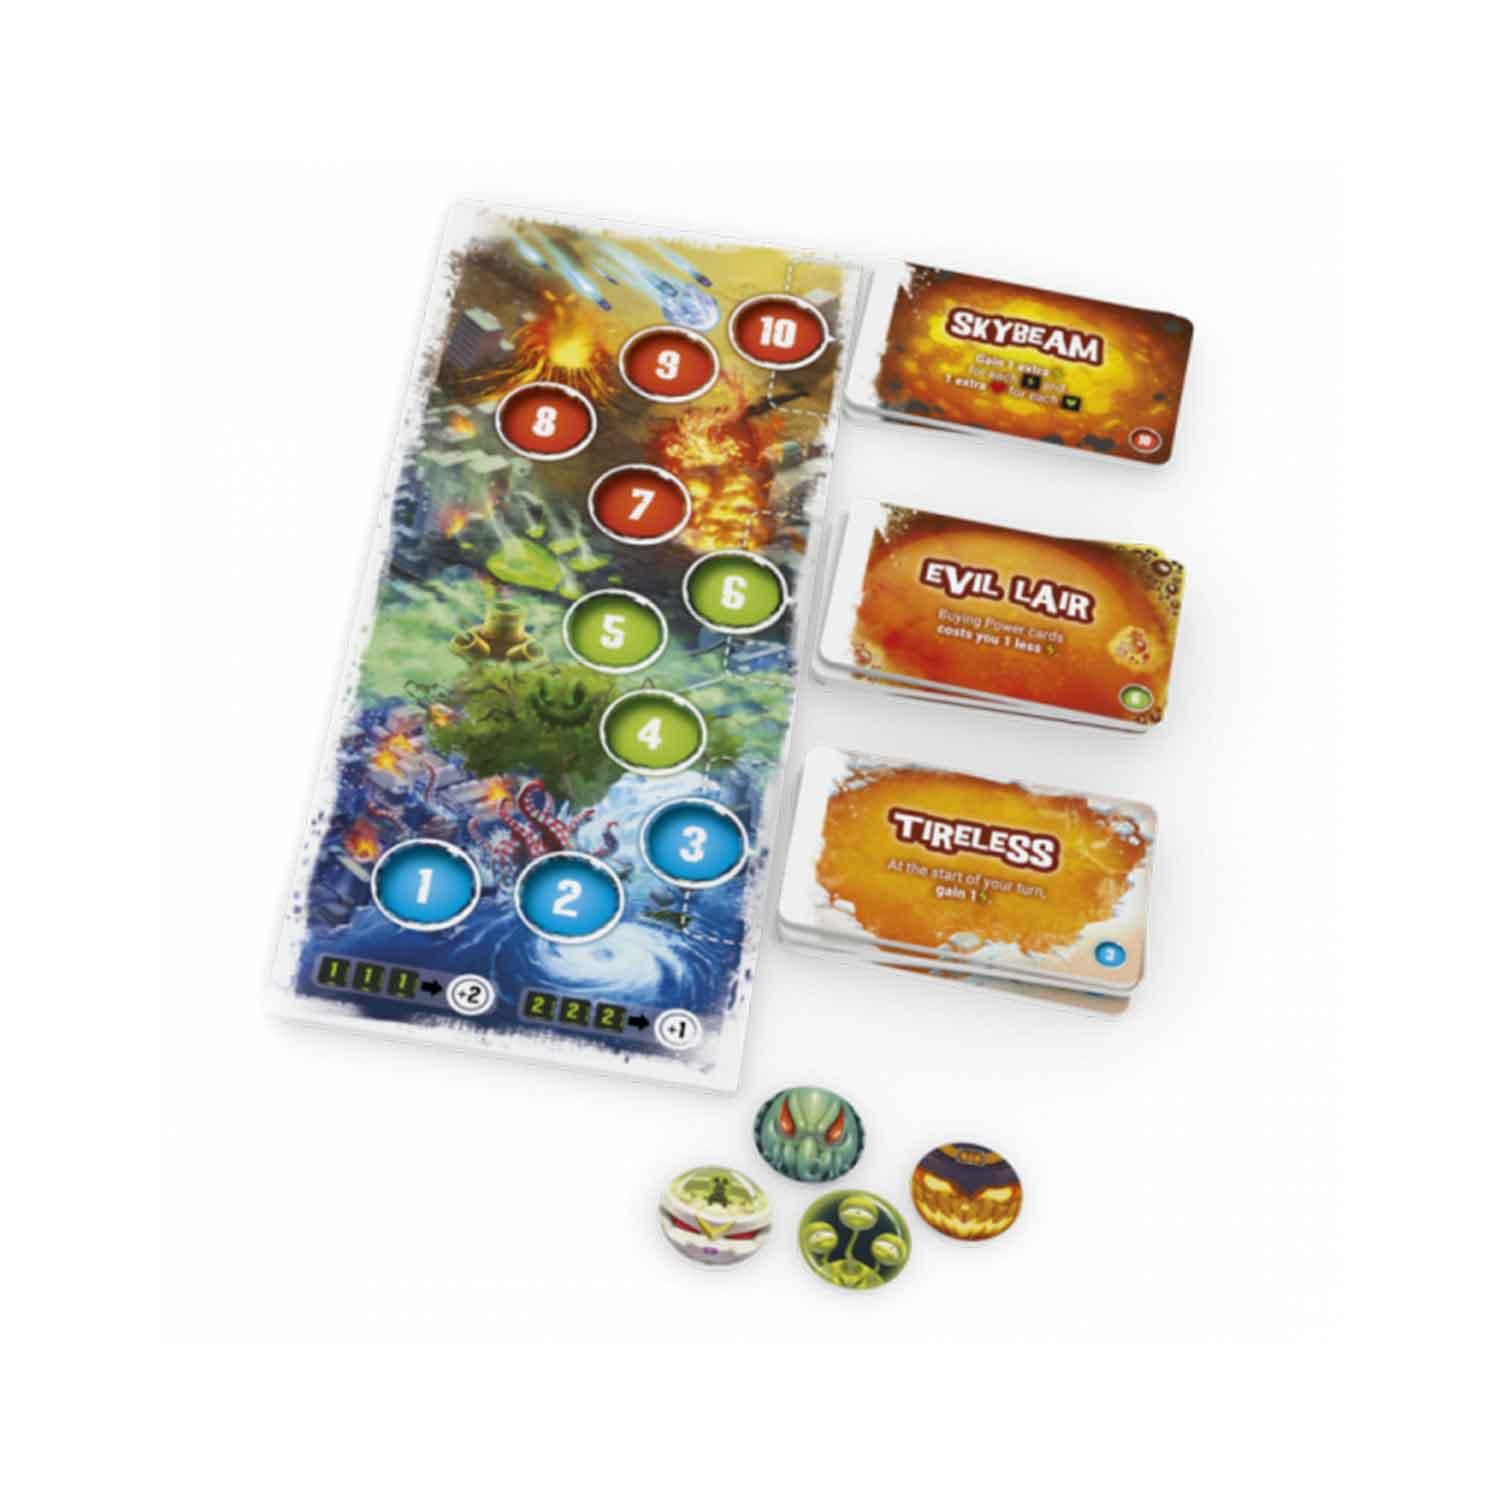 King of Tokyo Even More Wicked! Micro Expansion